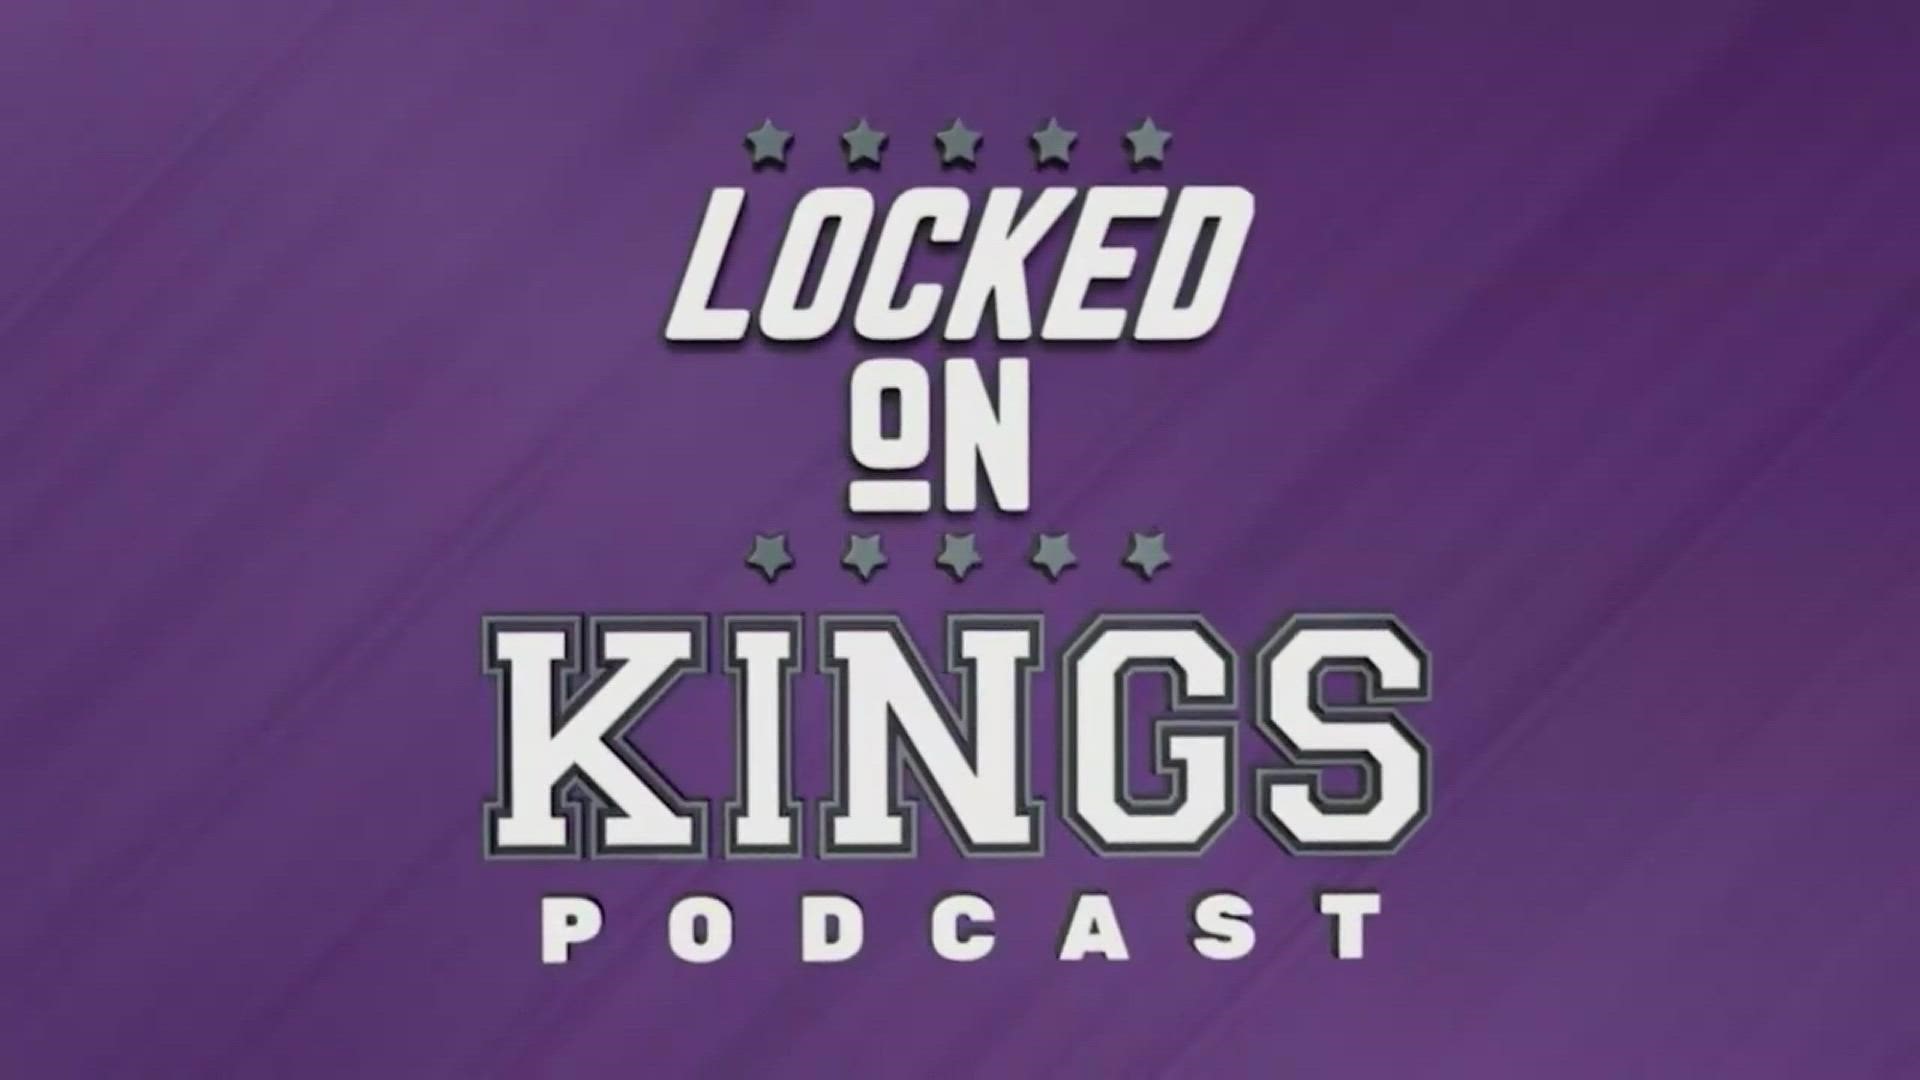 Matt George discusses the Sacramento Kings' loss to the Phoenix Suns and the context of the season heading into the All-Star break including playoff chances.